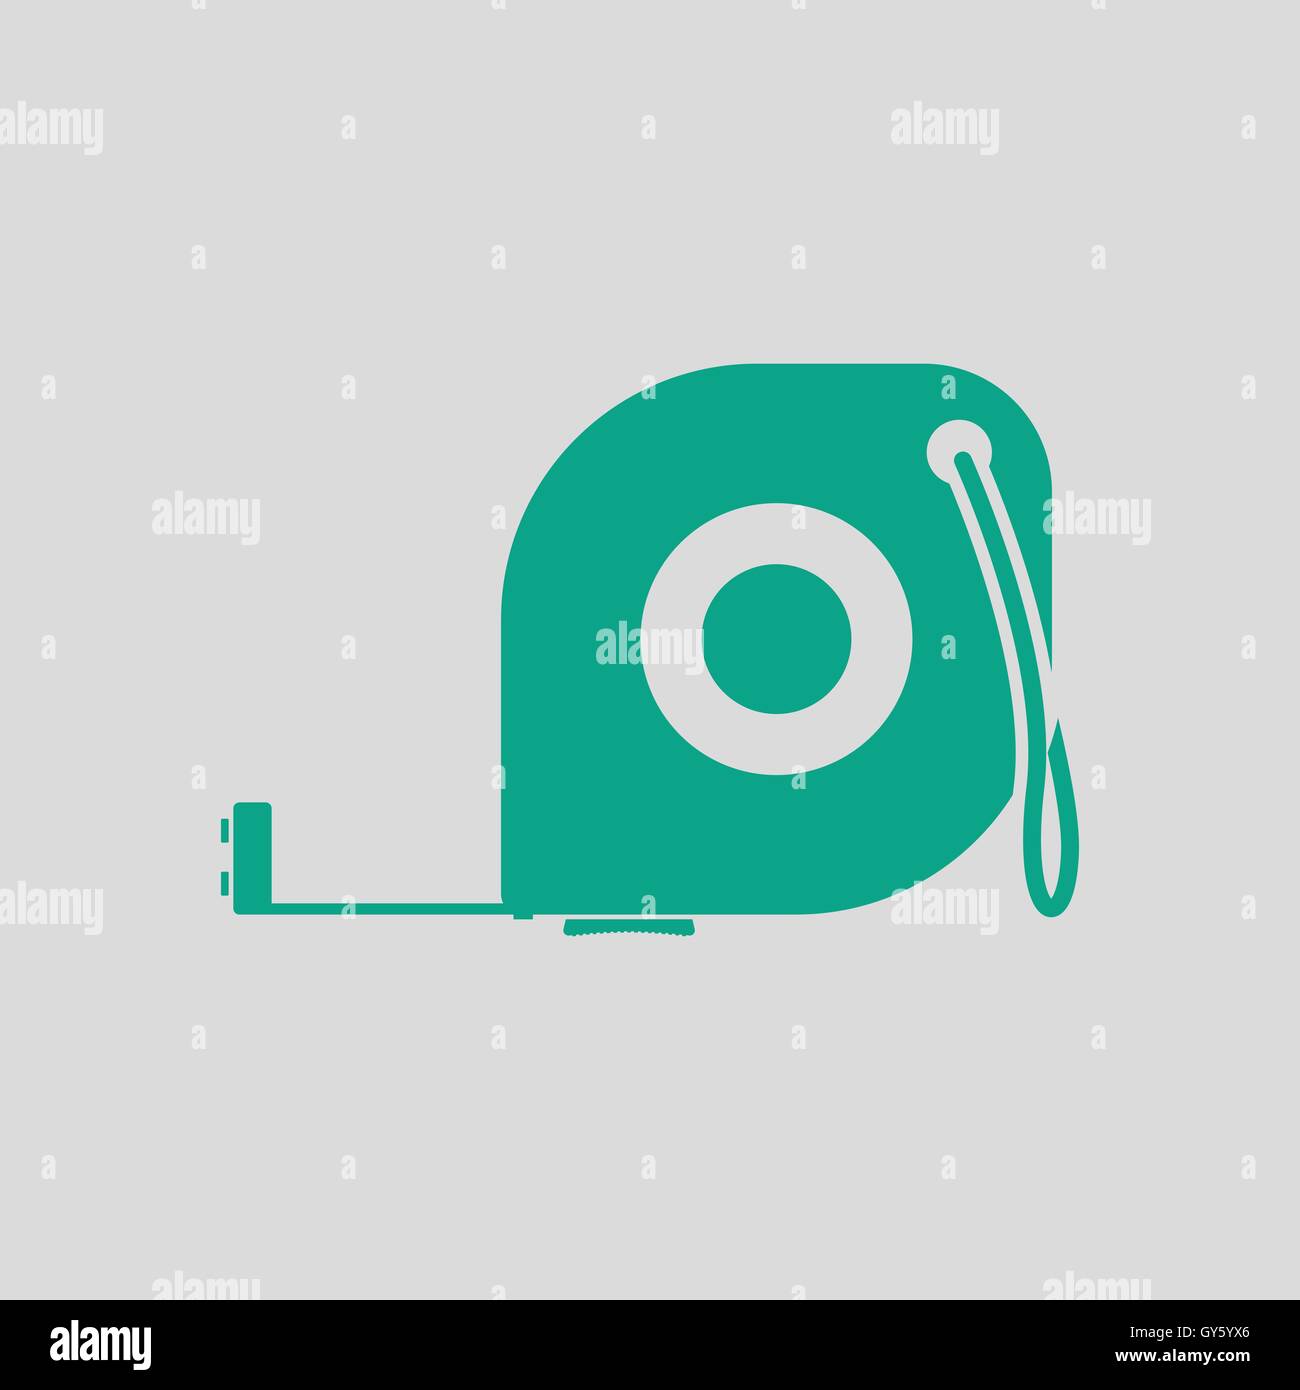 Icon of constriction tape measure. Gray background with green. Vector illustration. Stock Vector